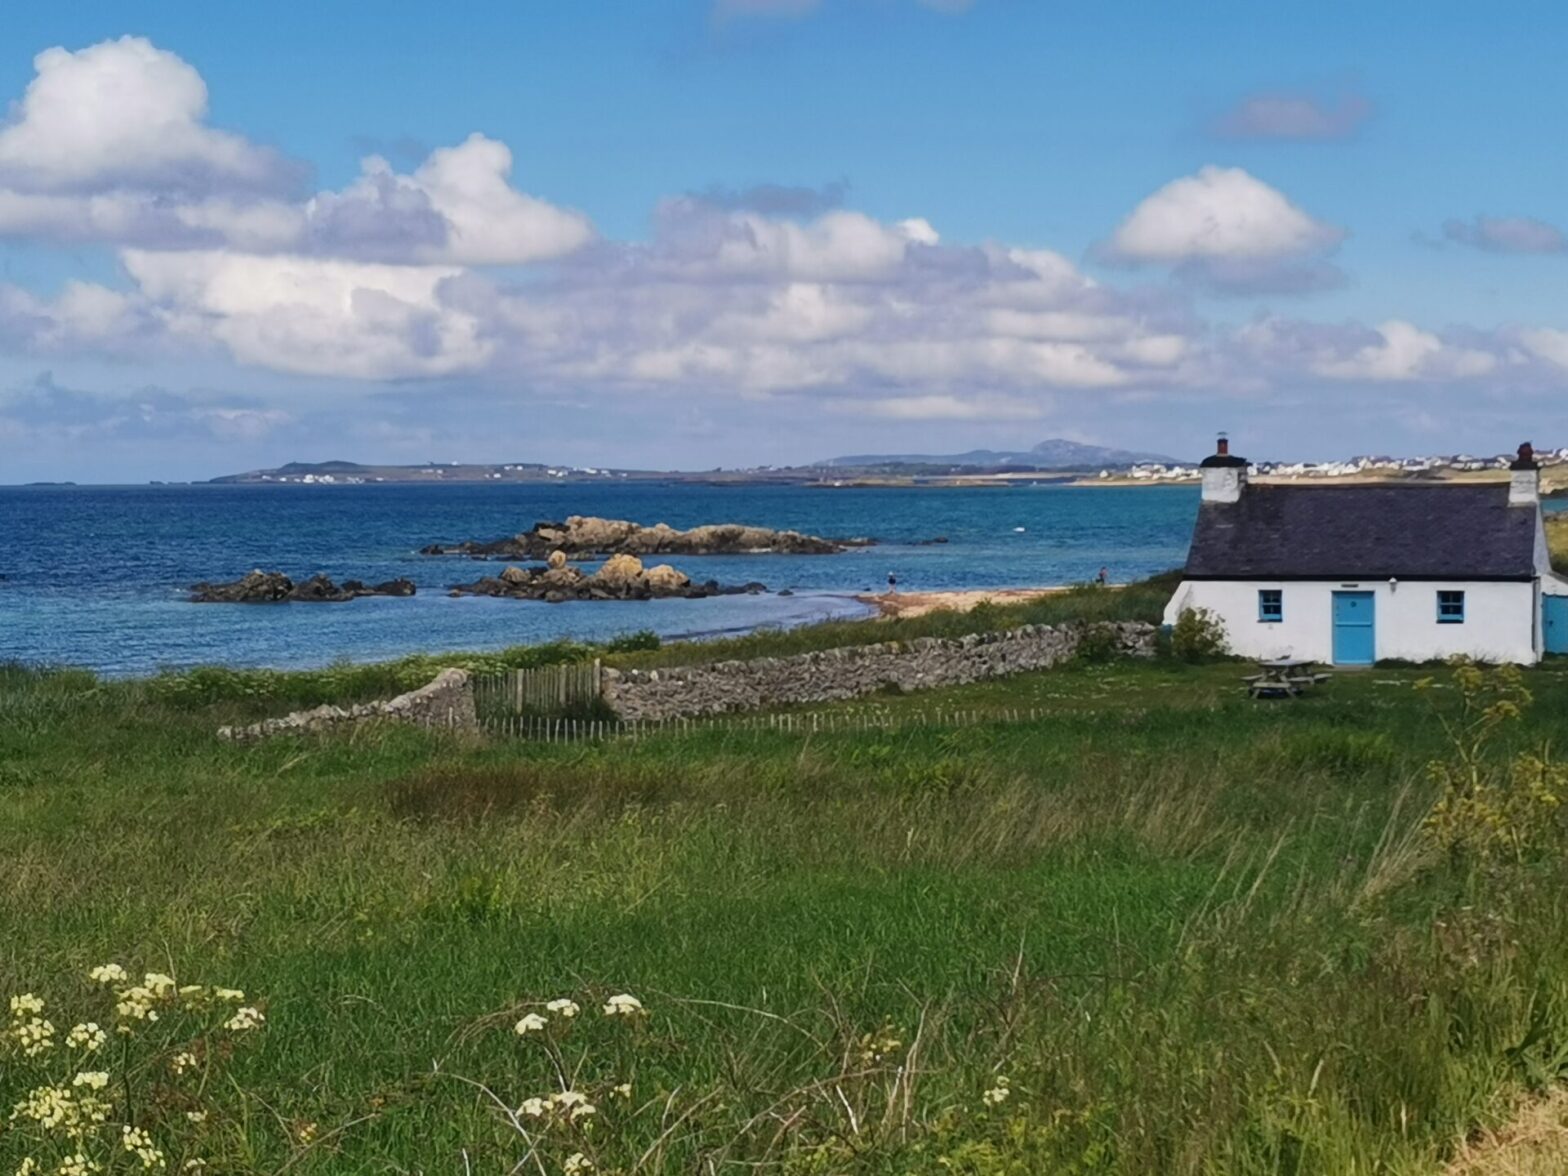 A pretty white cottage with a blue door stands at the endge of a rocky shore and blue sea on Anglesey